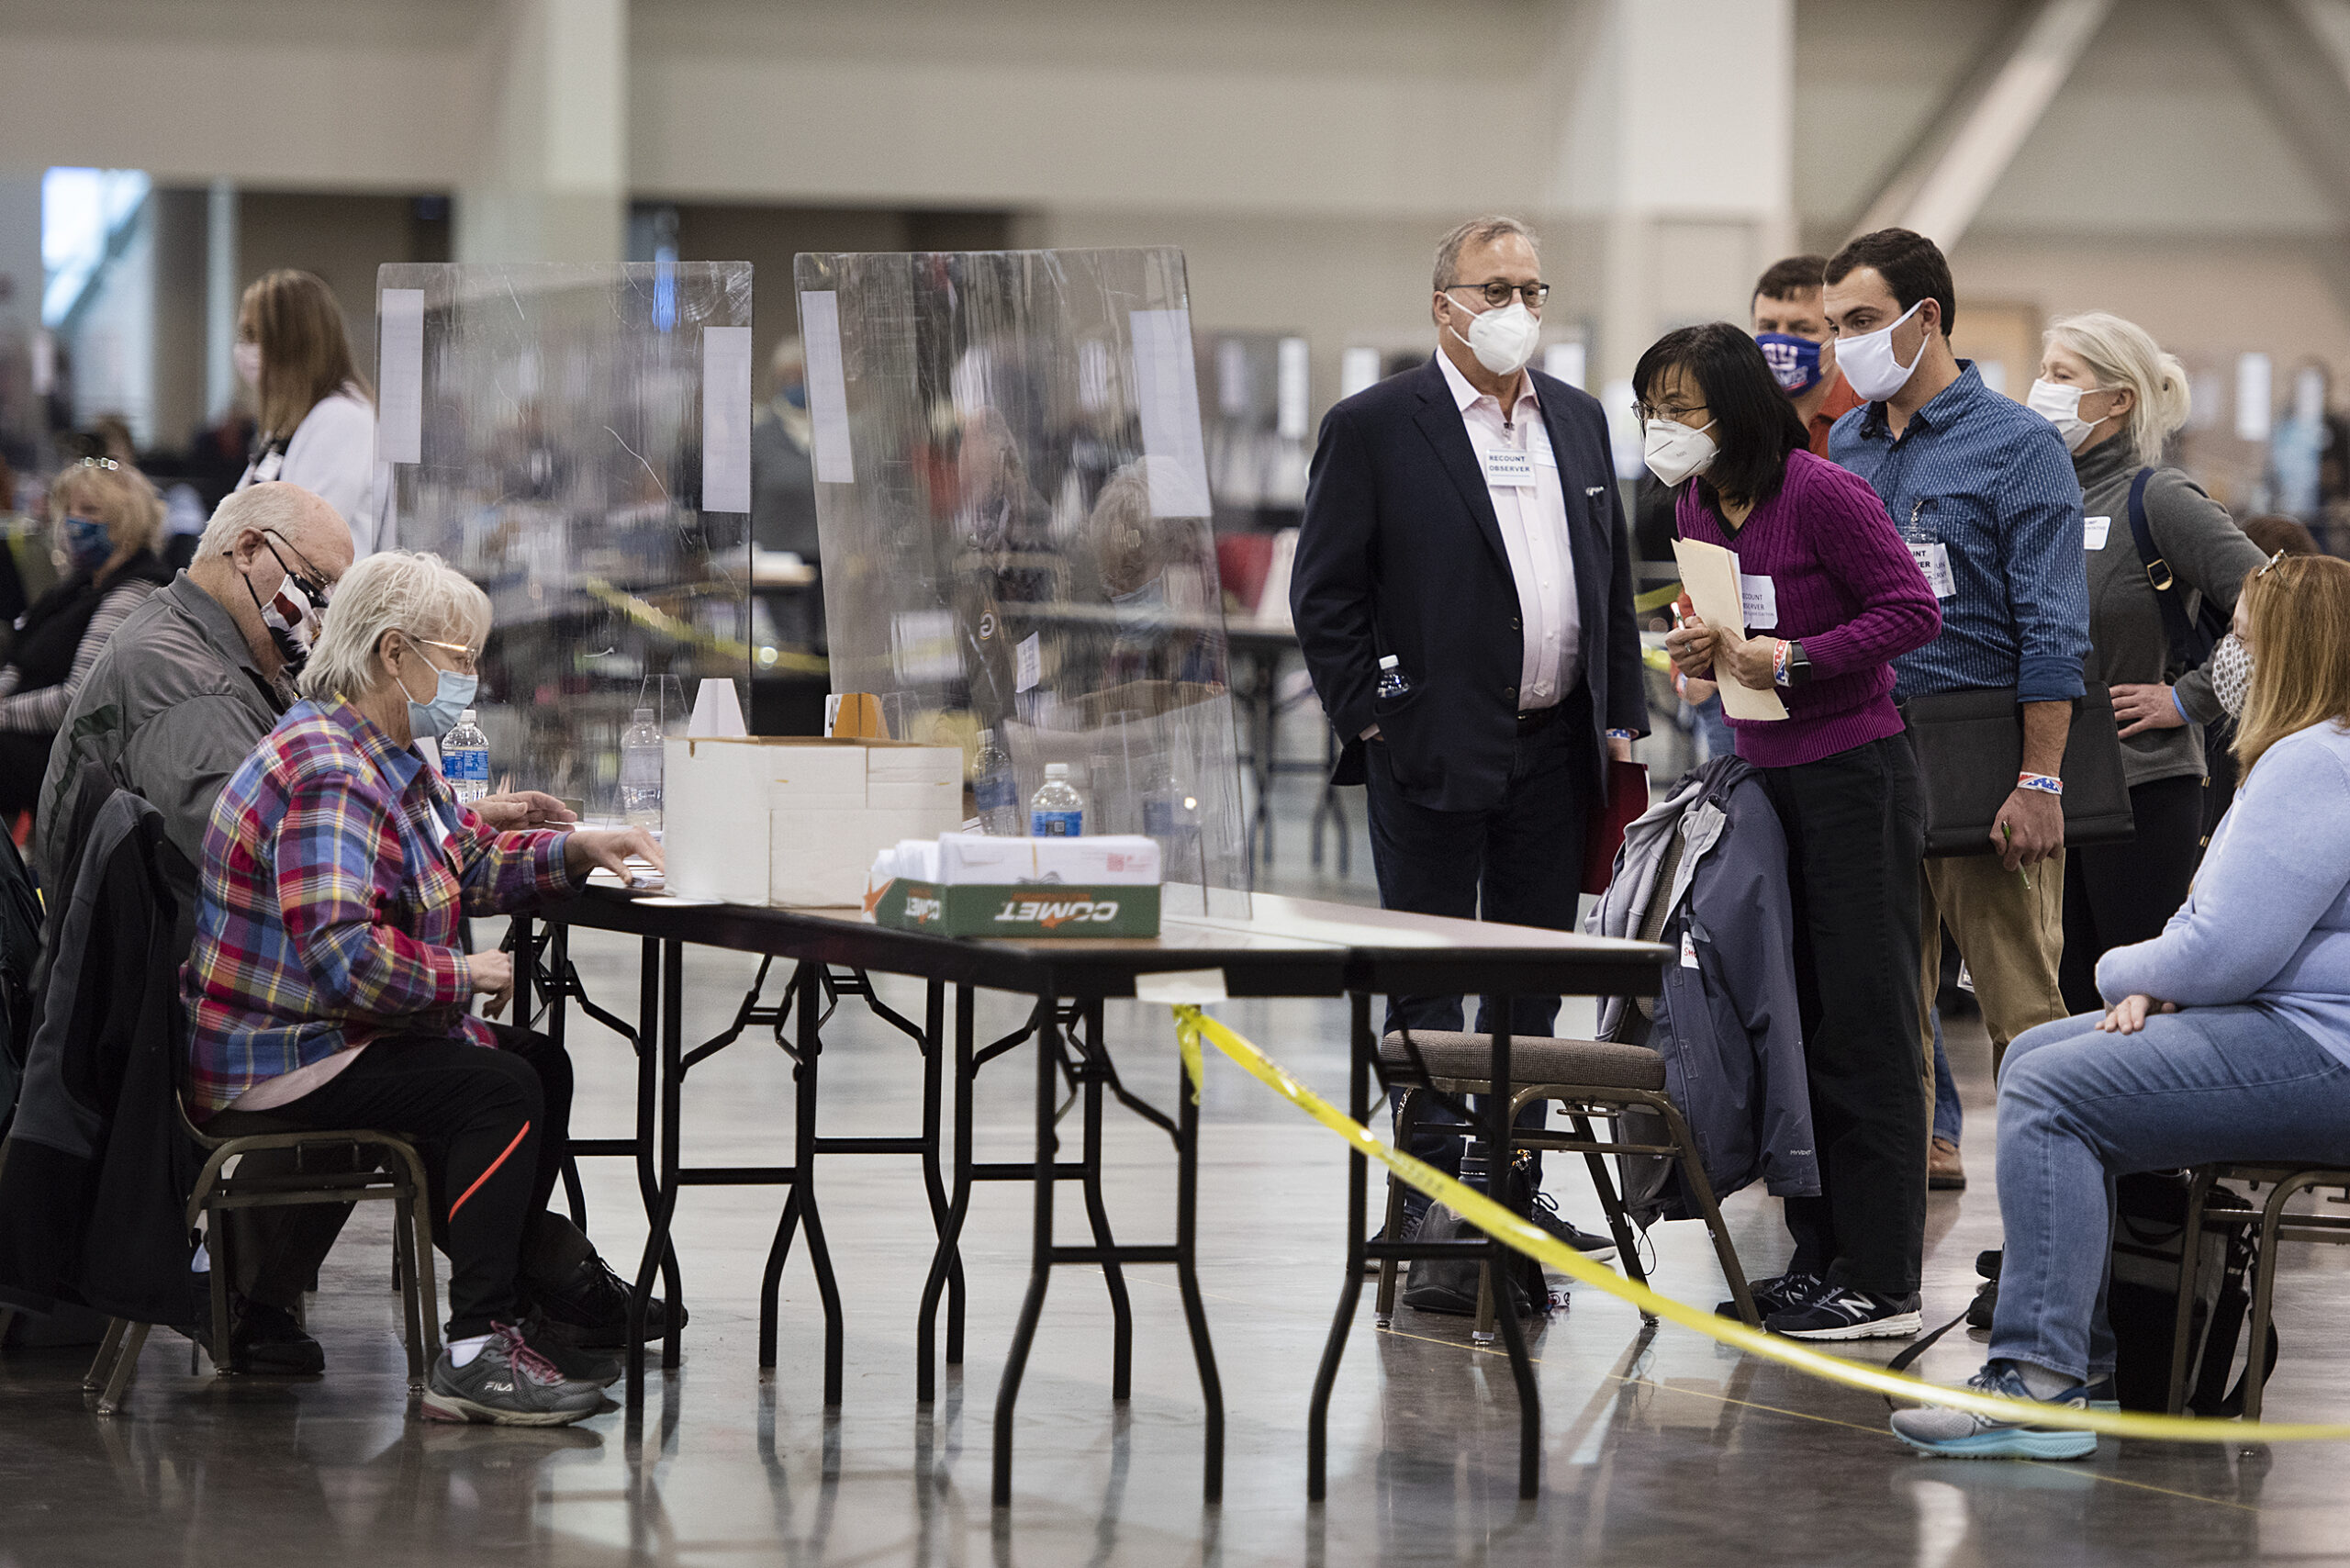 Several election observers lean forward to peer through plexiglass at two people counting ballots